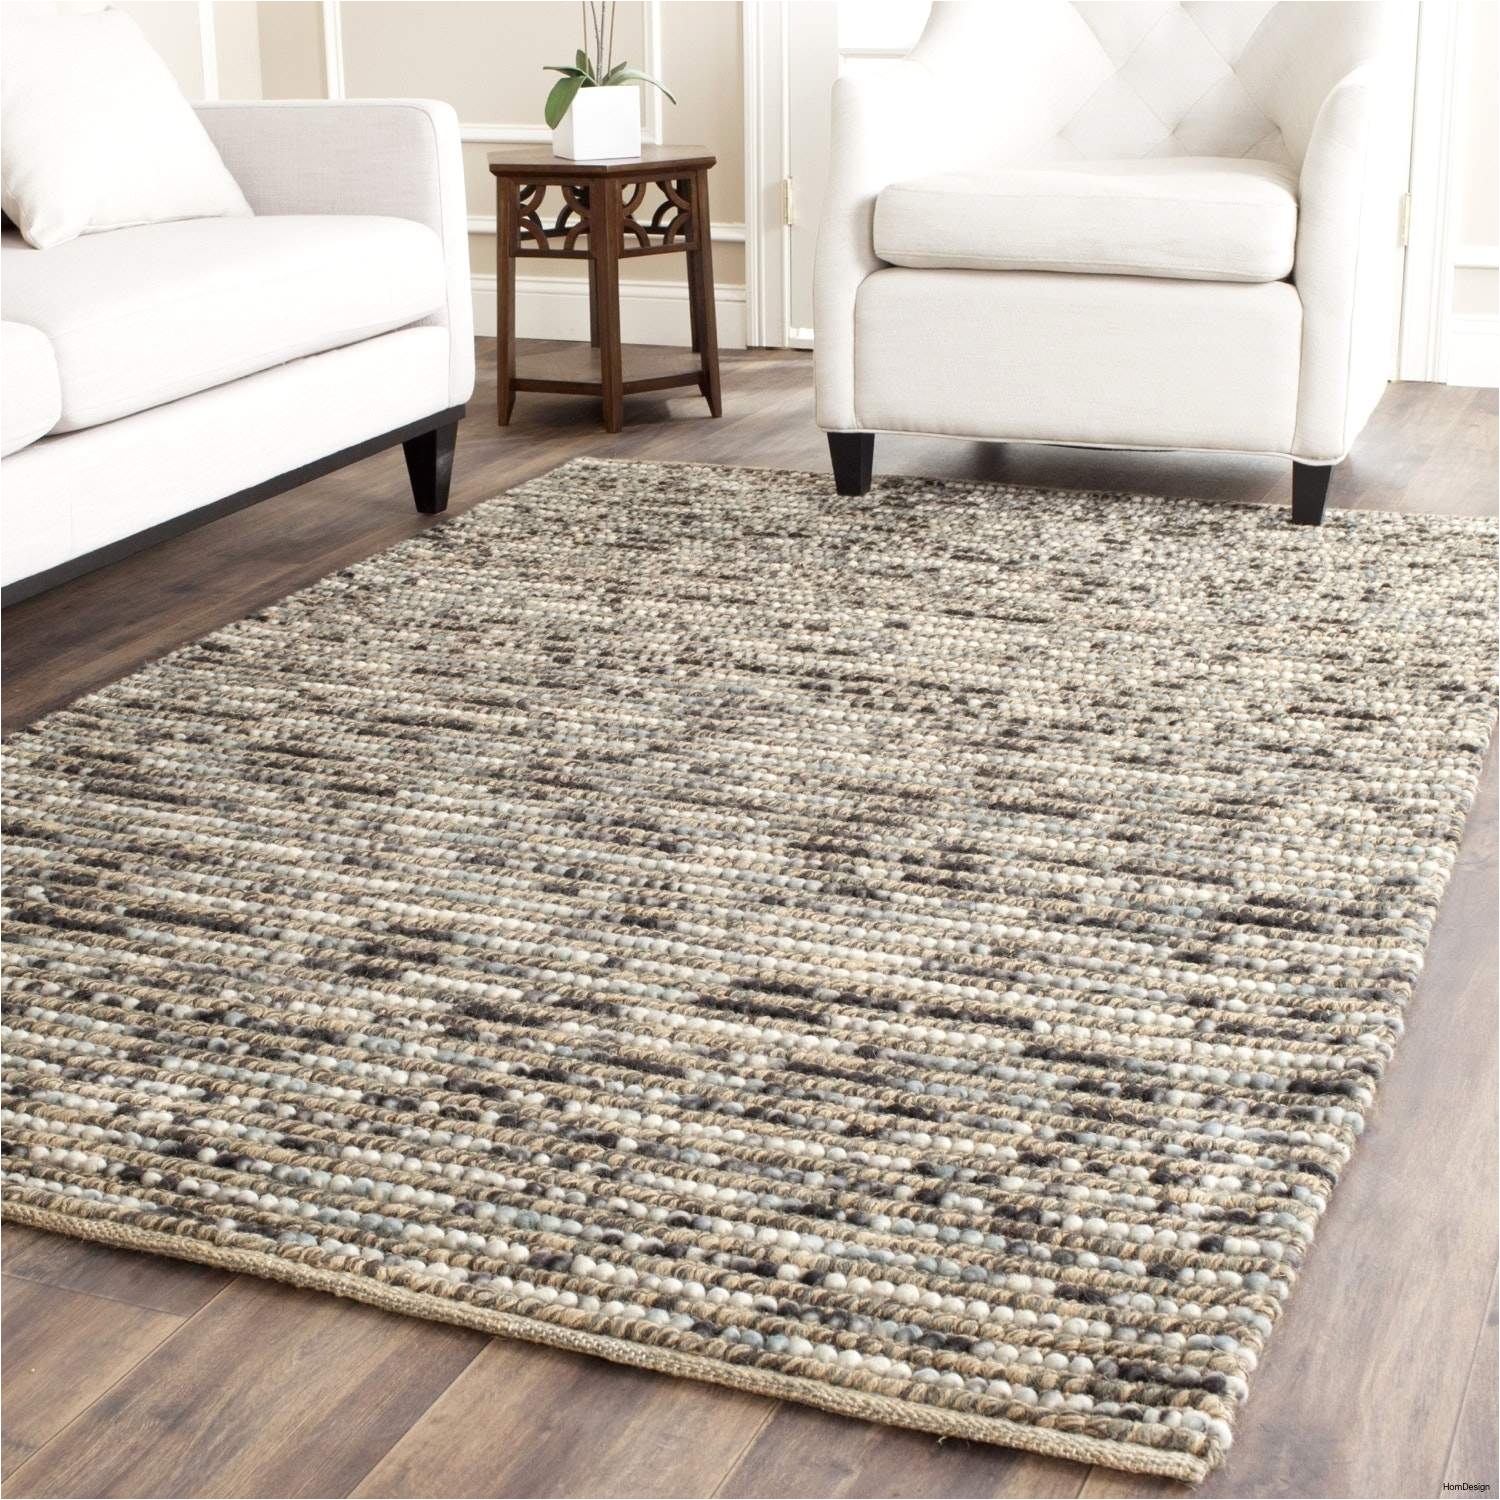 white faux fur area rug elegant rugged new cheap area rugs blue rug as gold and